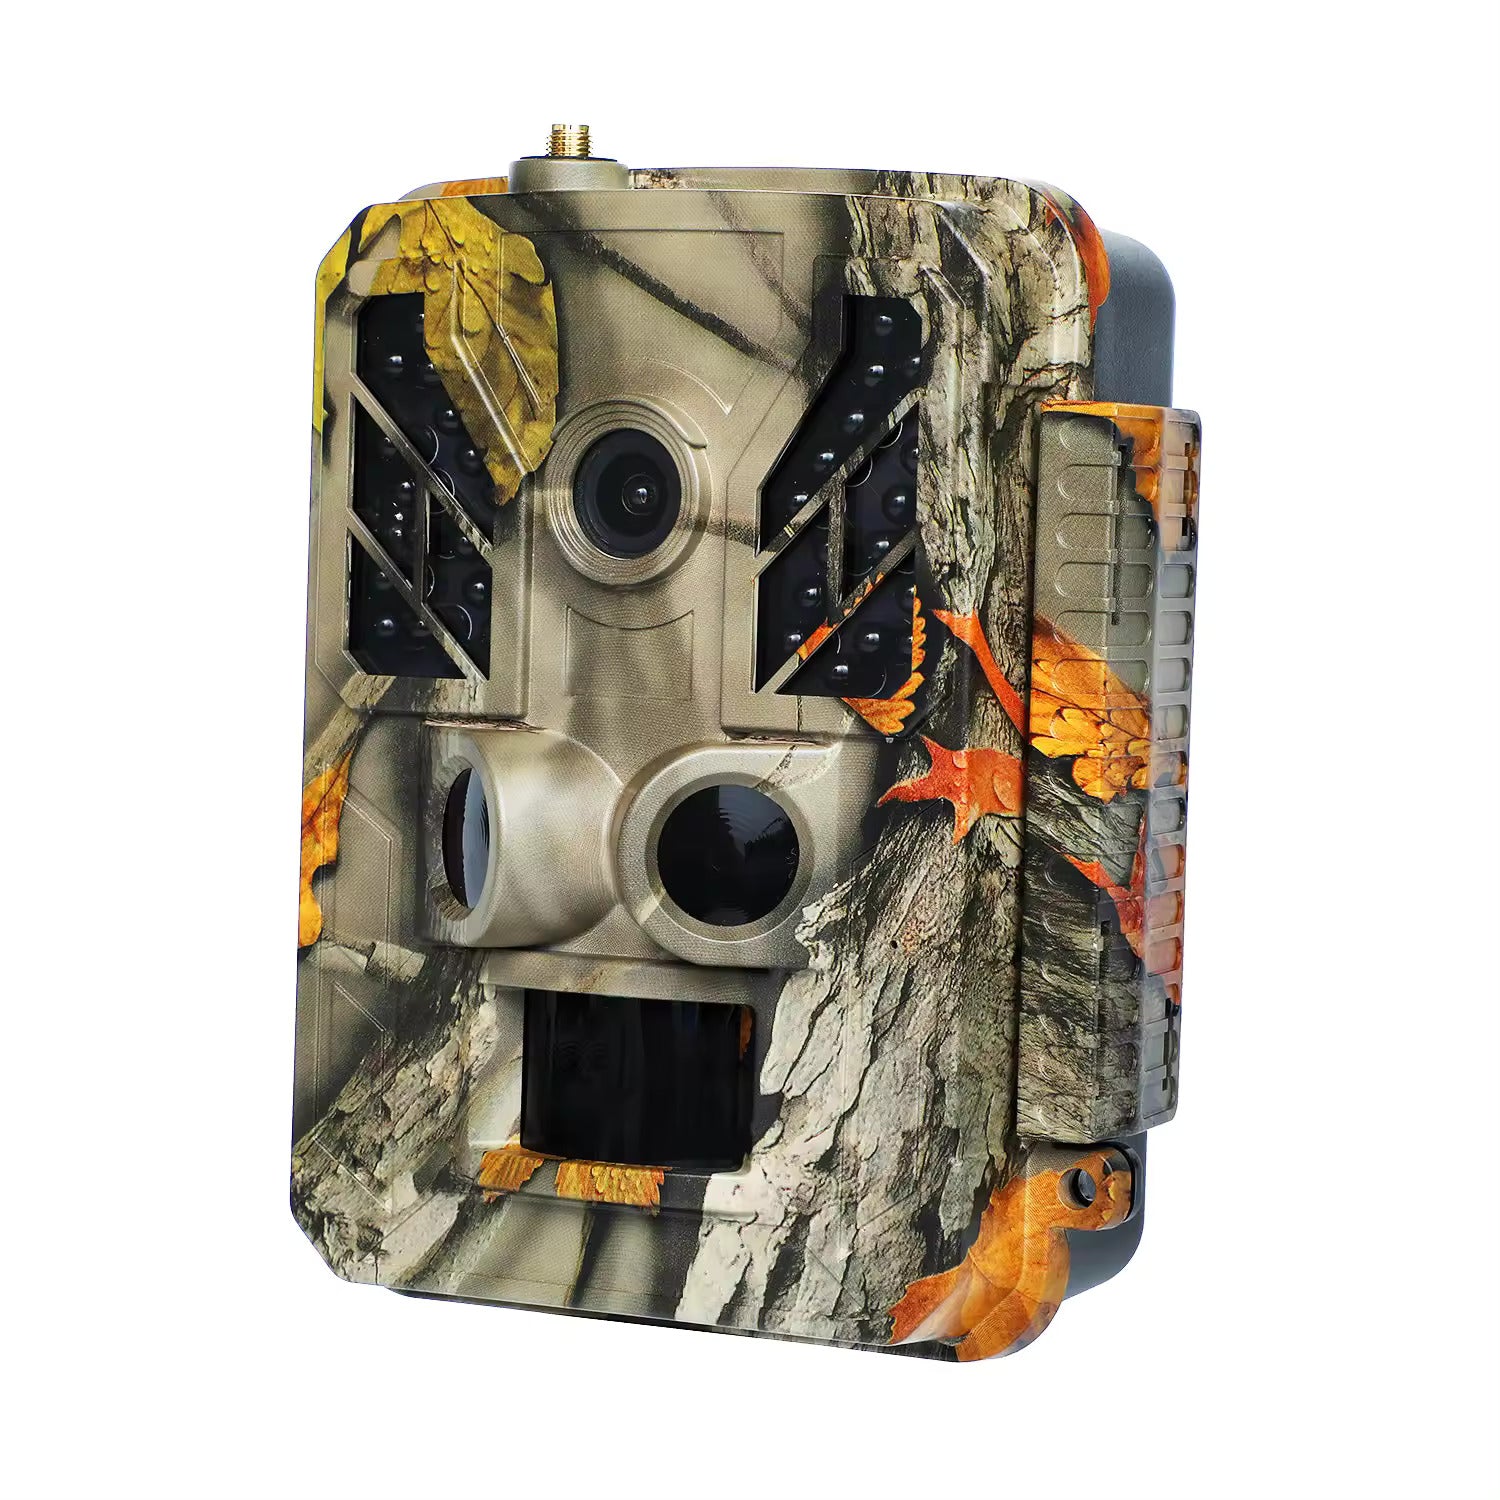 A hunting trail camera with a realistic camouflage design is expertly concealed in the forest, equipped with advanced sensors for capturing high-quality wildlife images.